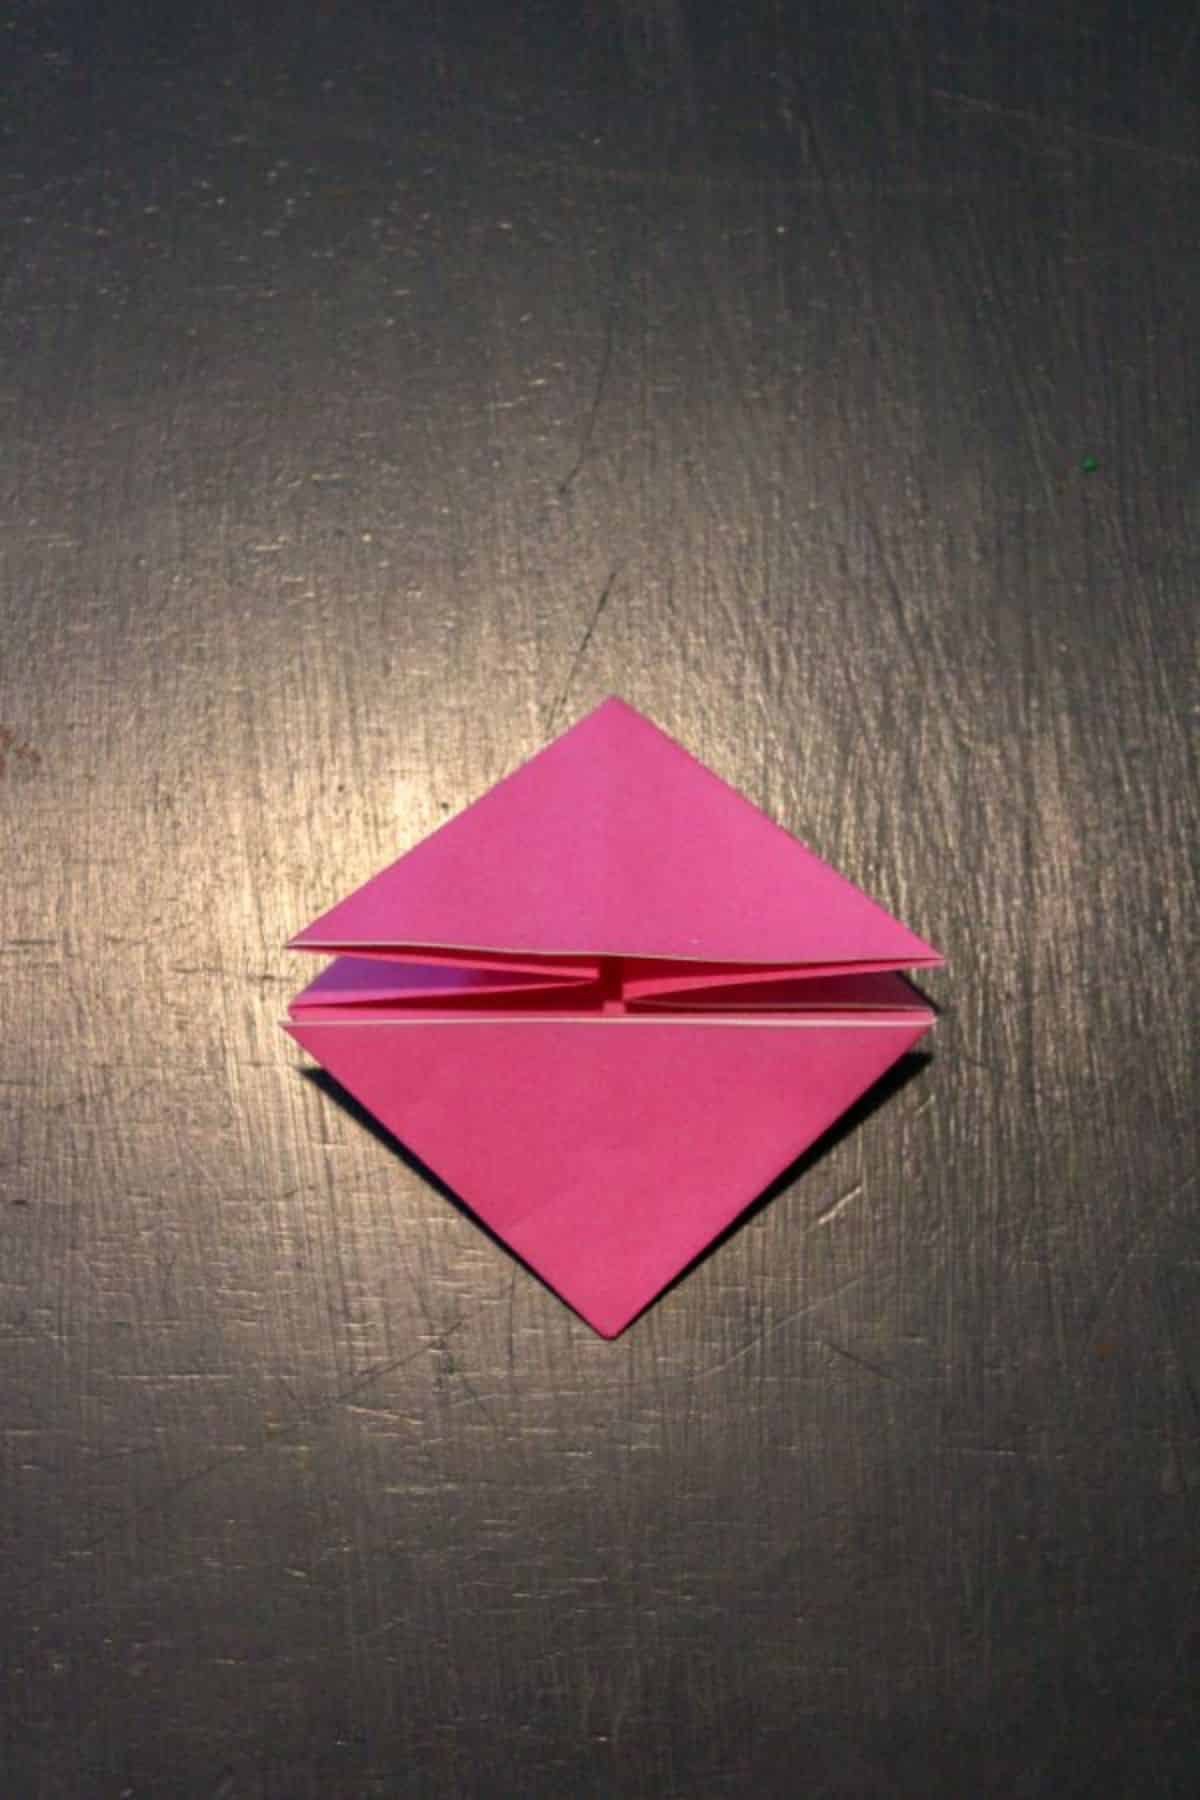 on a black background, the pink origami paper is folded up into a nice little diamond.